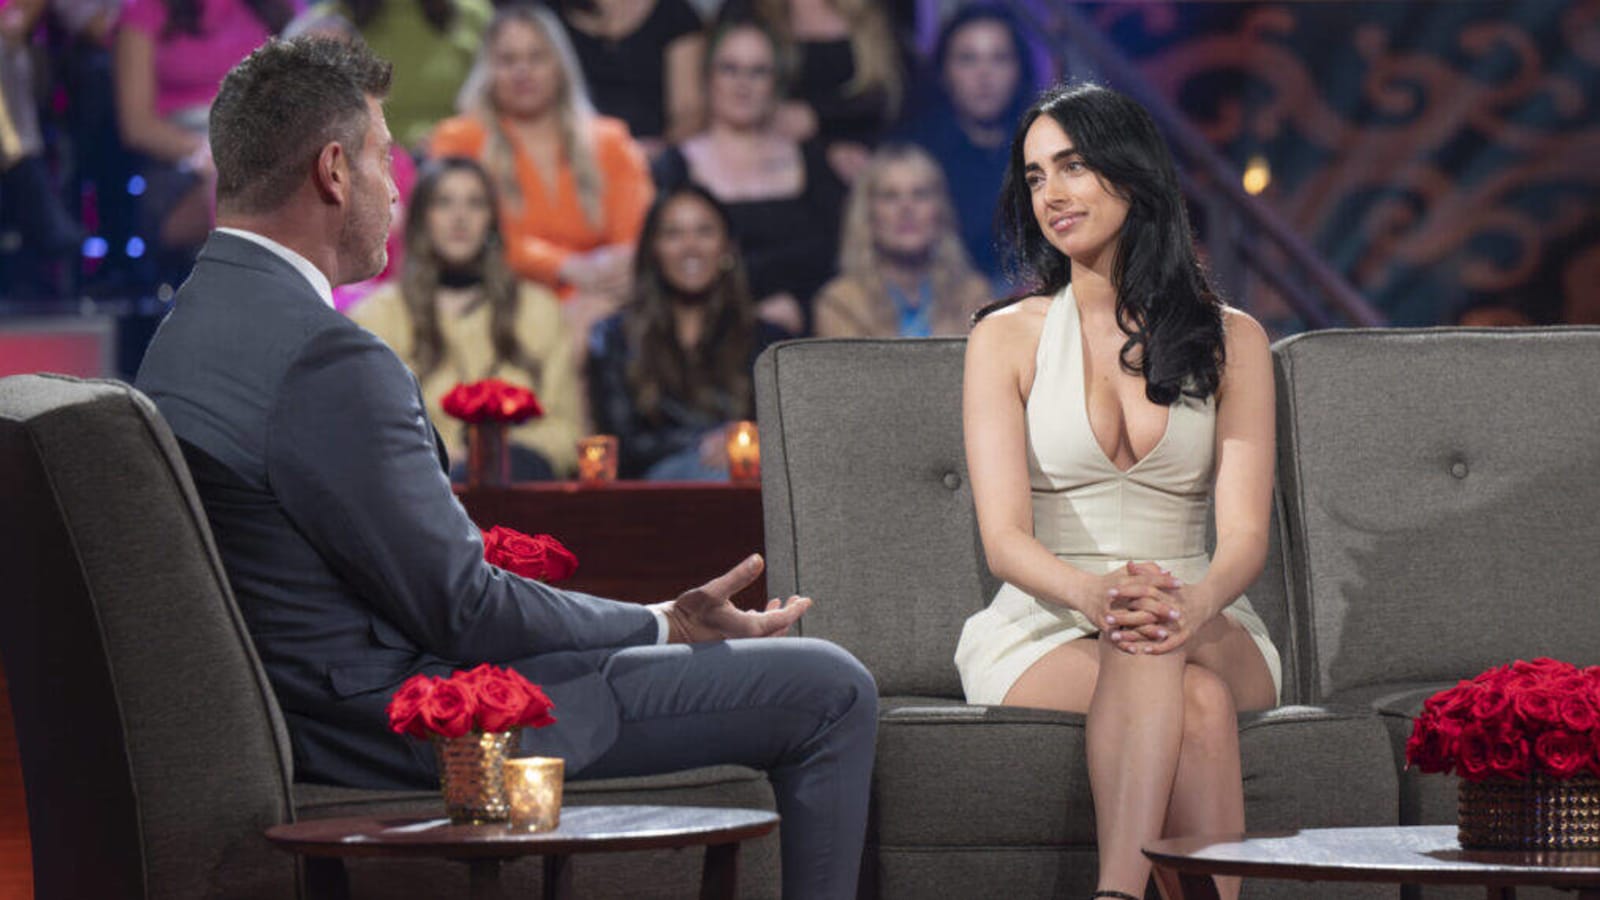 Maria Georgas Confirms She Backed Out of ‘The Bachelorette’: Why She Walked Away